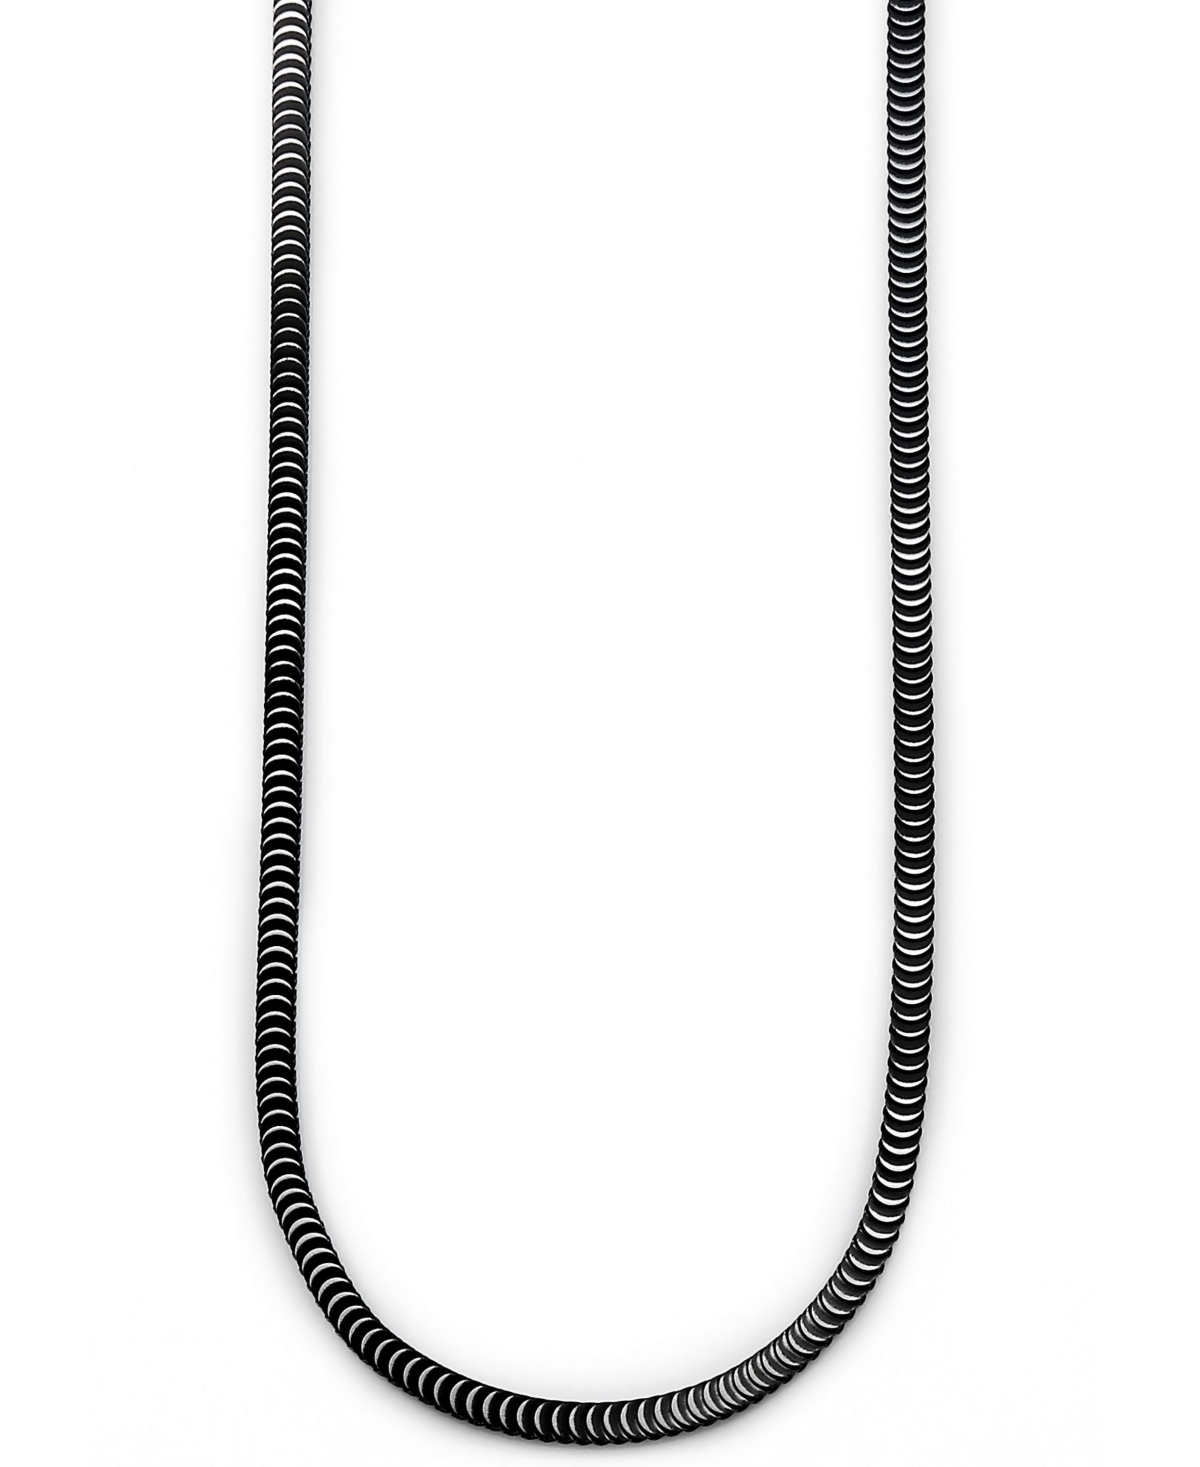 Sutton Stainless Steel Snake Chain Necklace - Black